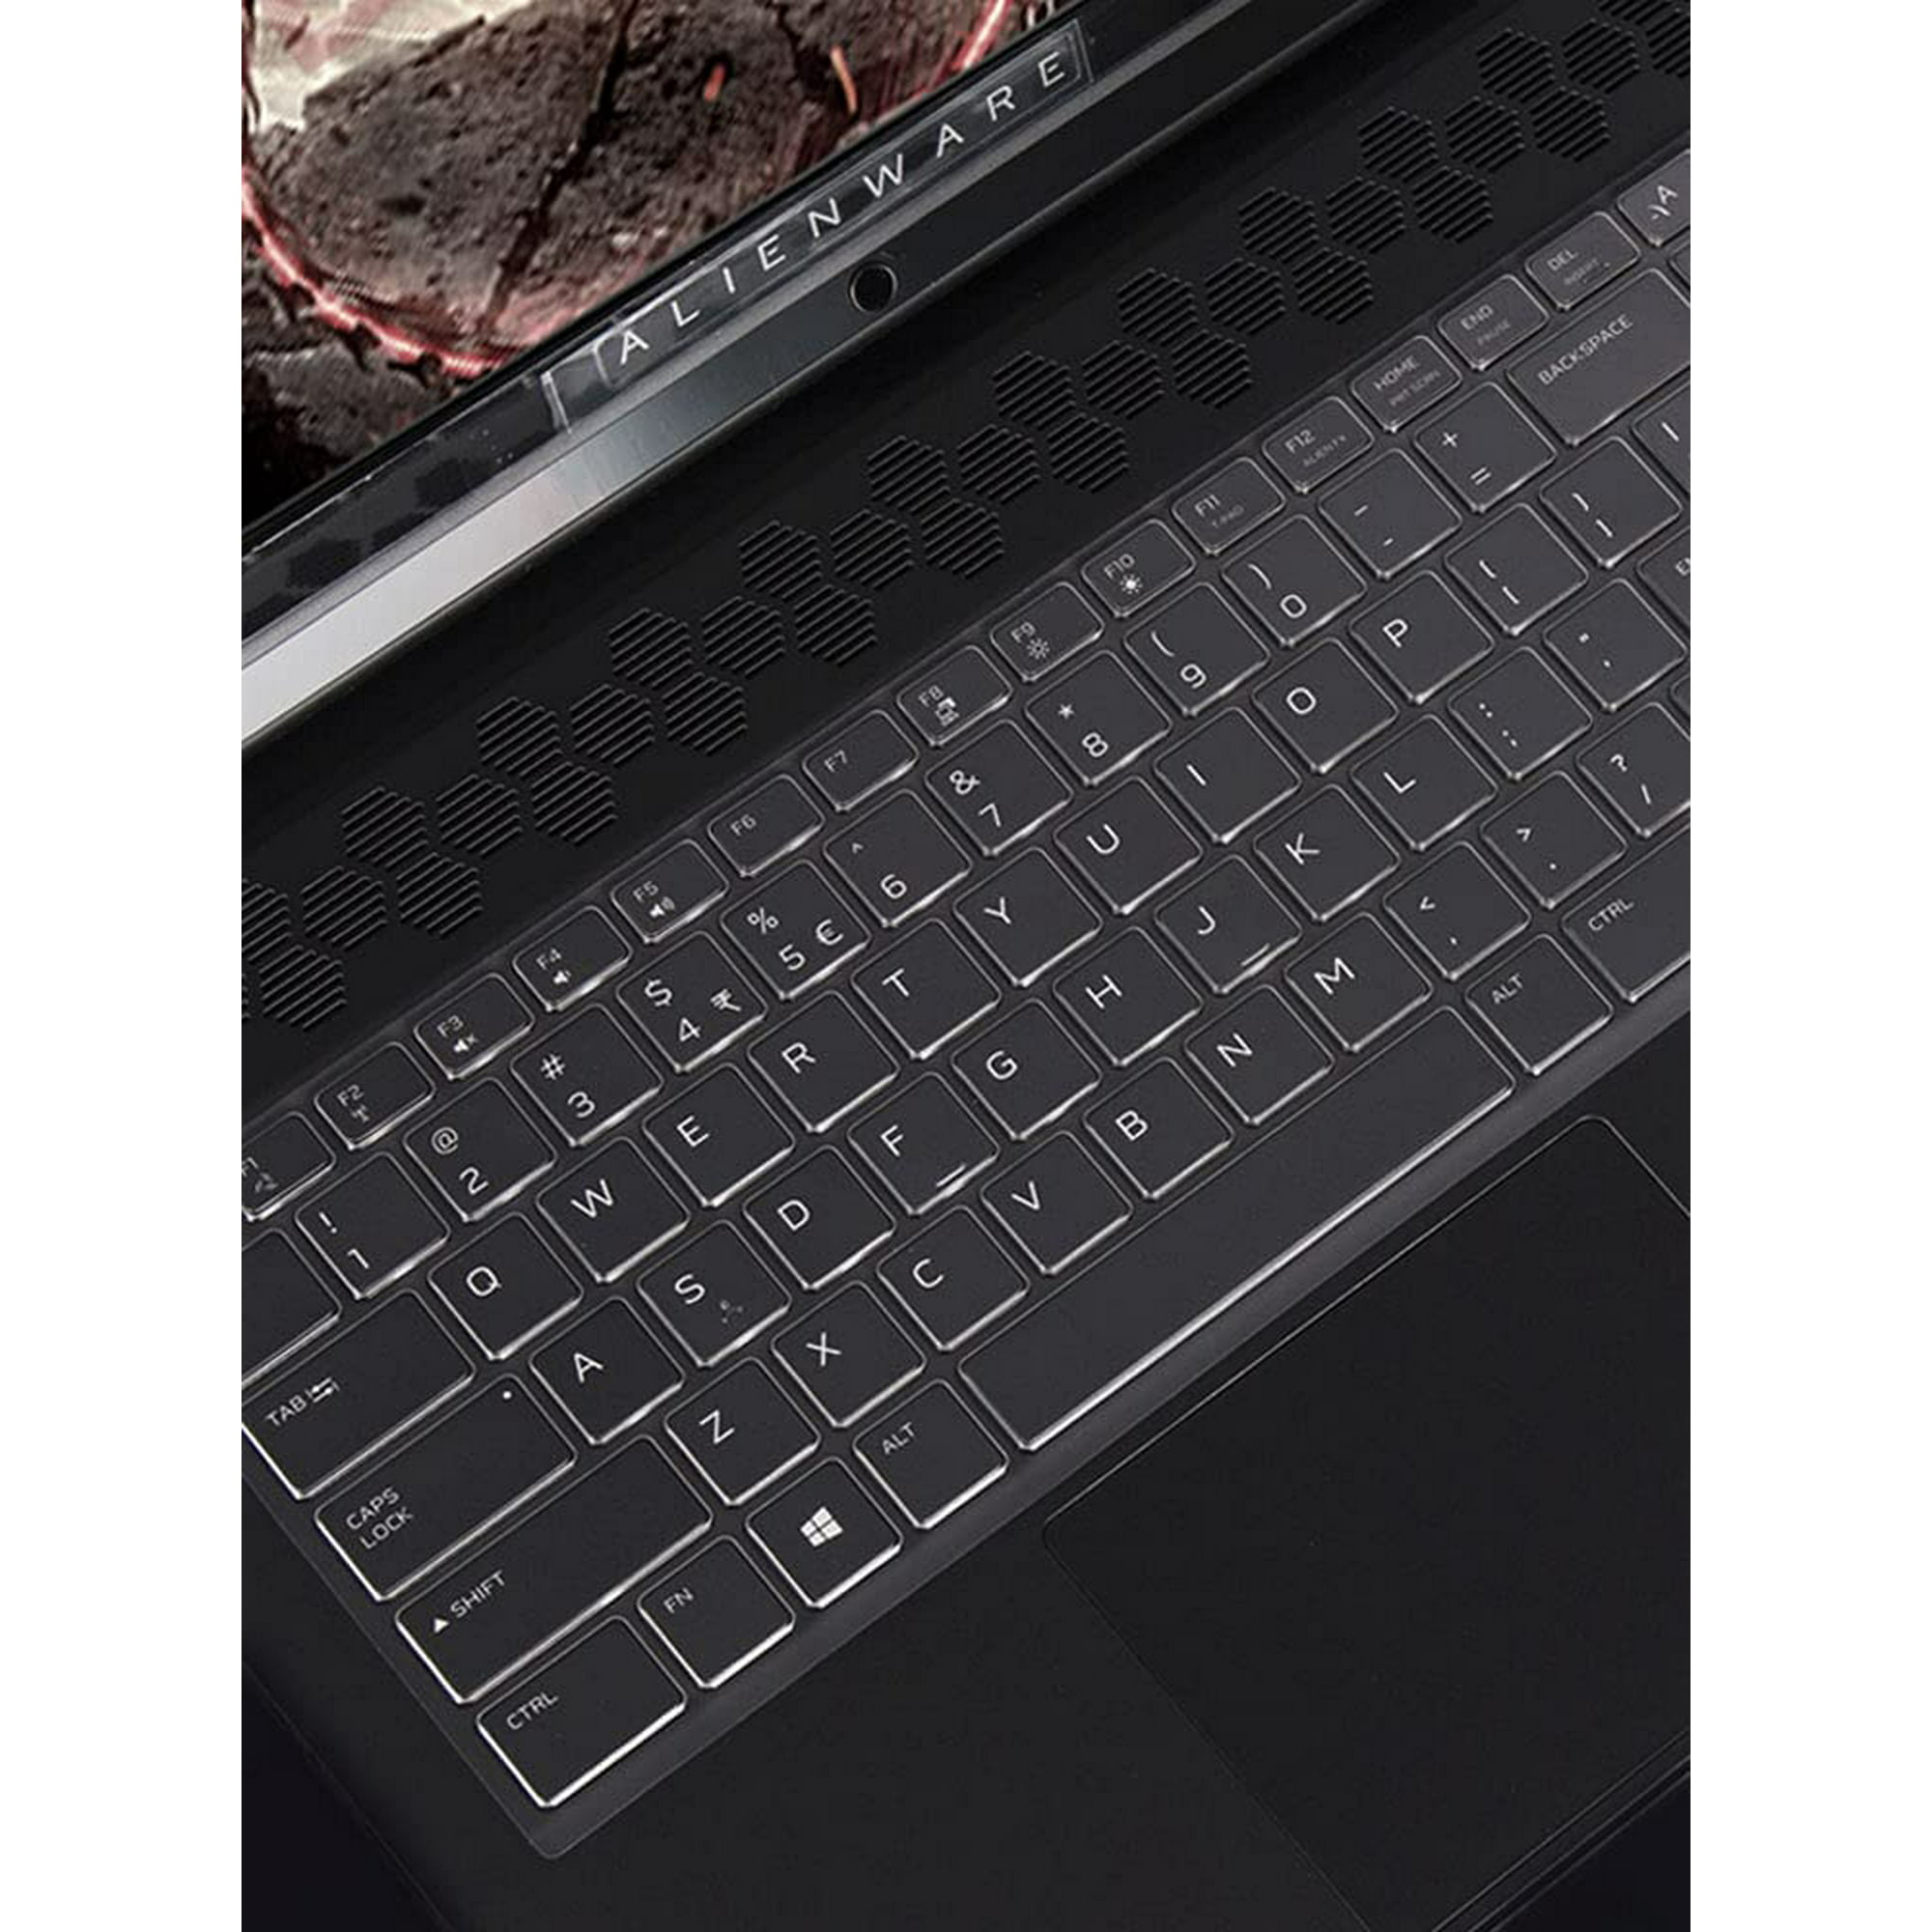 Keyboard Cover for 2021 New Dell Alienware m15 Ryzen Edition R5 & m15 R6, Alienware  x15 R1 & Alienware x17 R1 Gaming | Walmart Canada